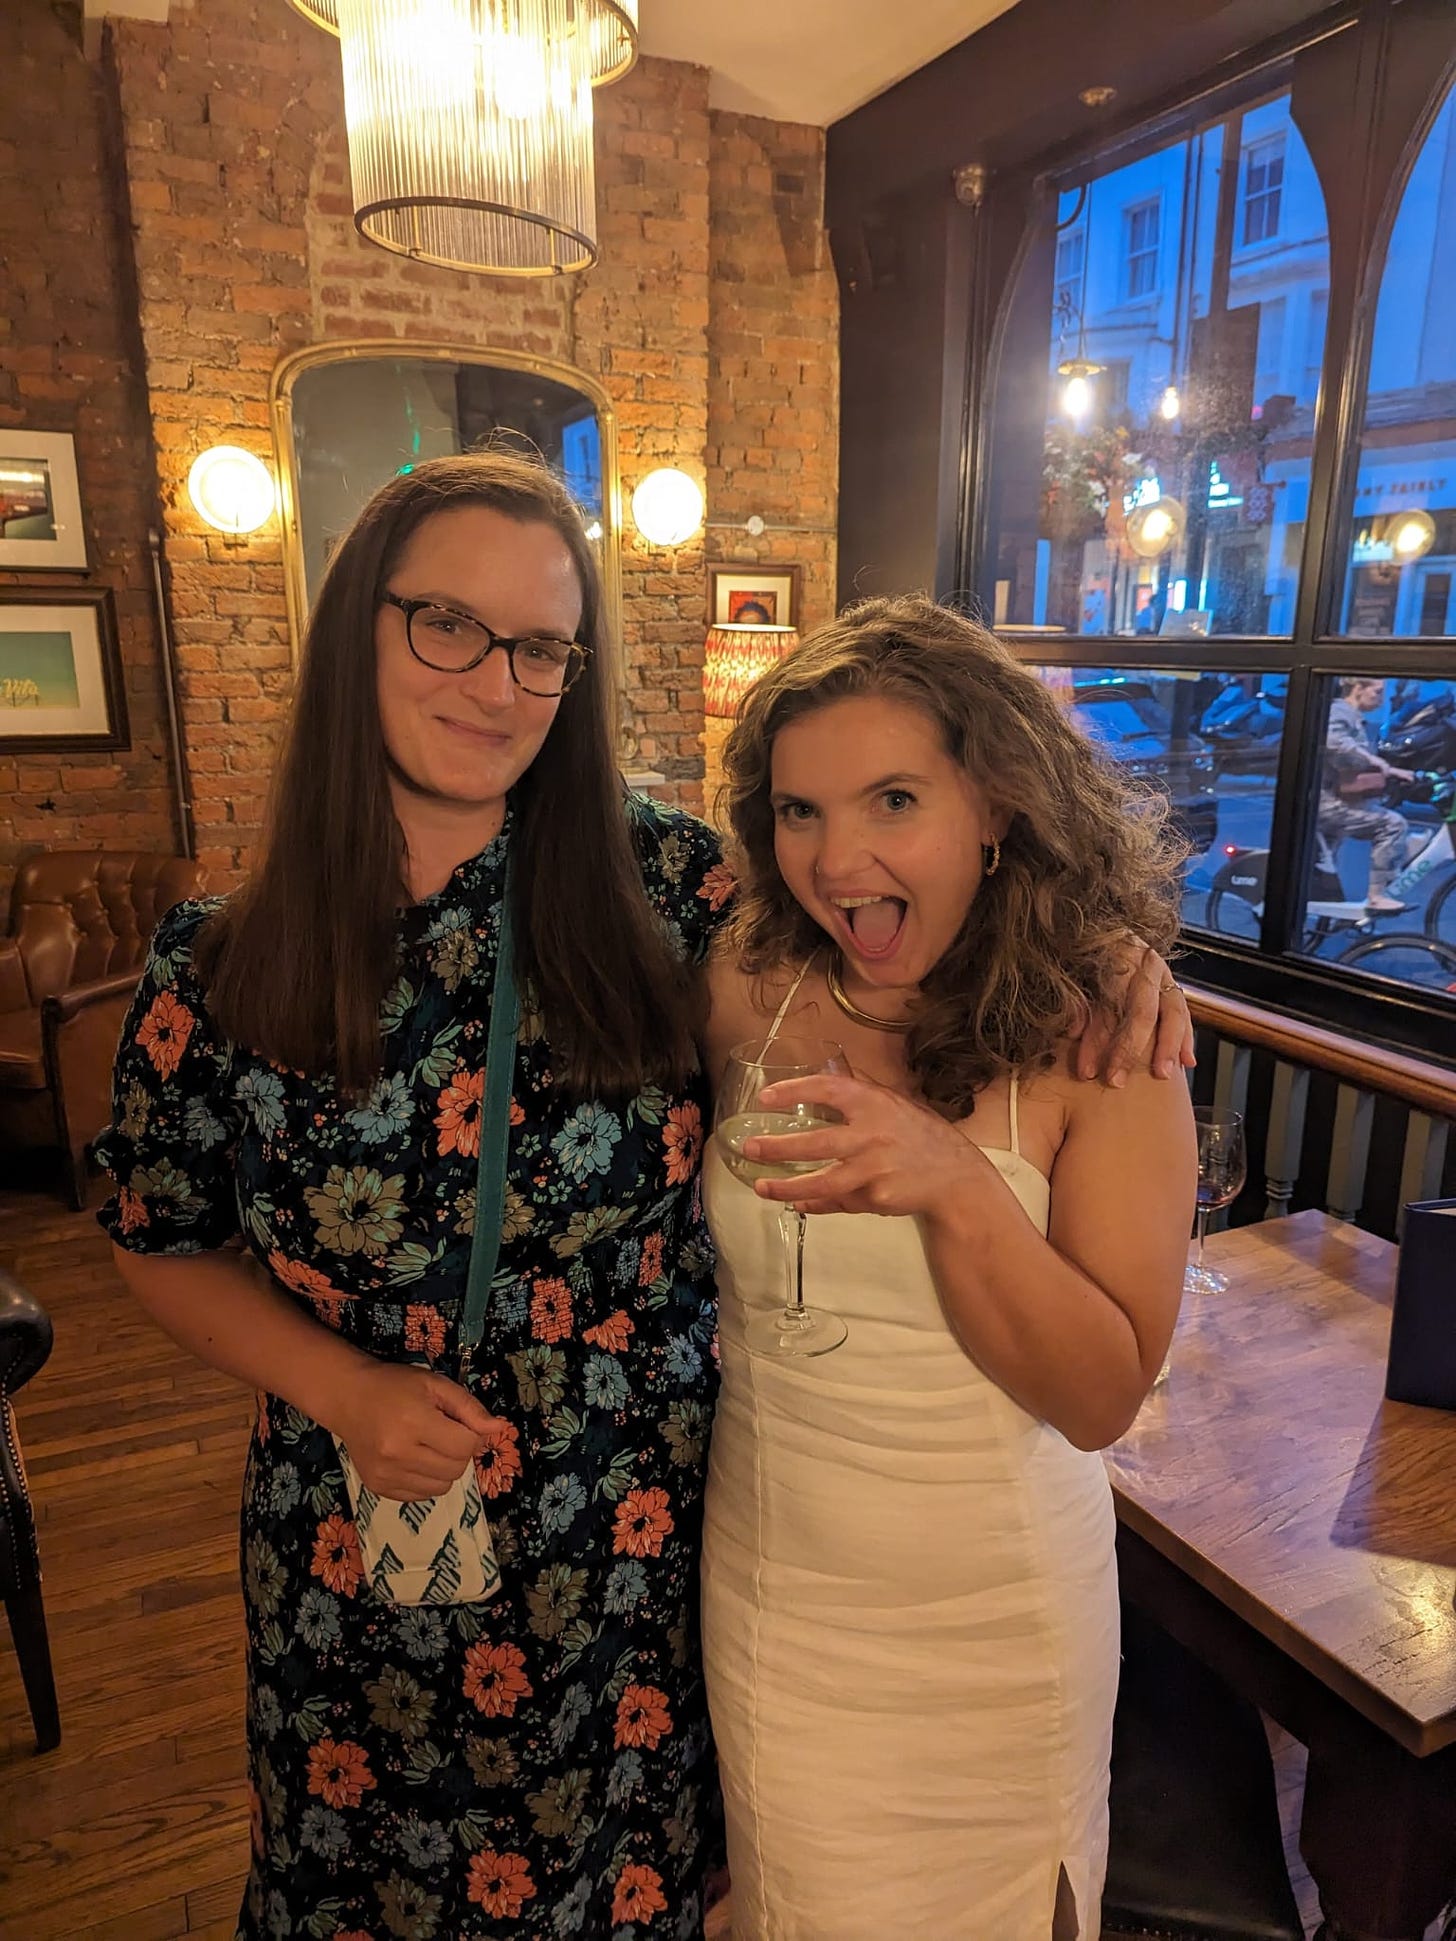 Mel and Fliss - Mel is a white woman with brown hair and glasses wearing a floral dress, Fliss is a white woman with wavy brown hair wearing a white dress and cheersing herself quite rightly